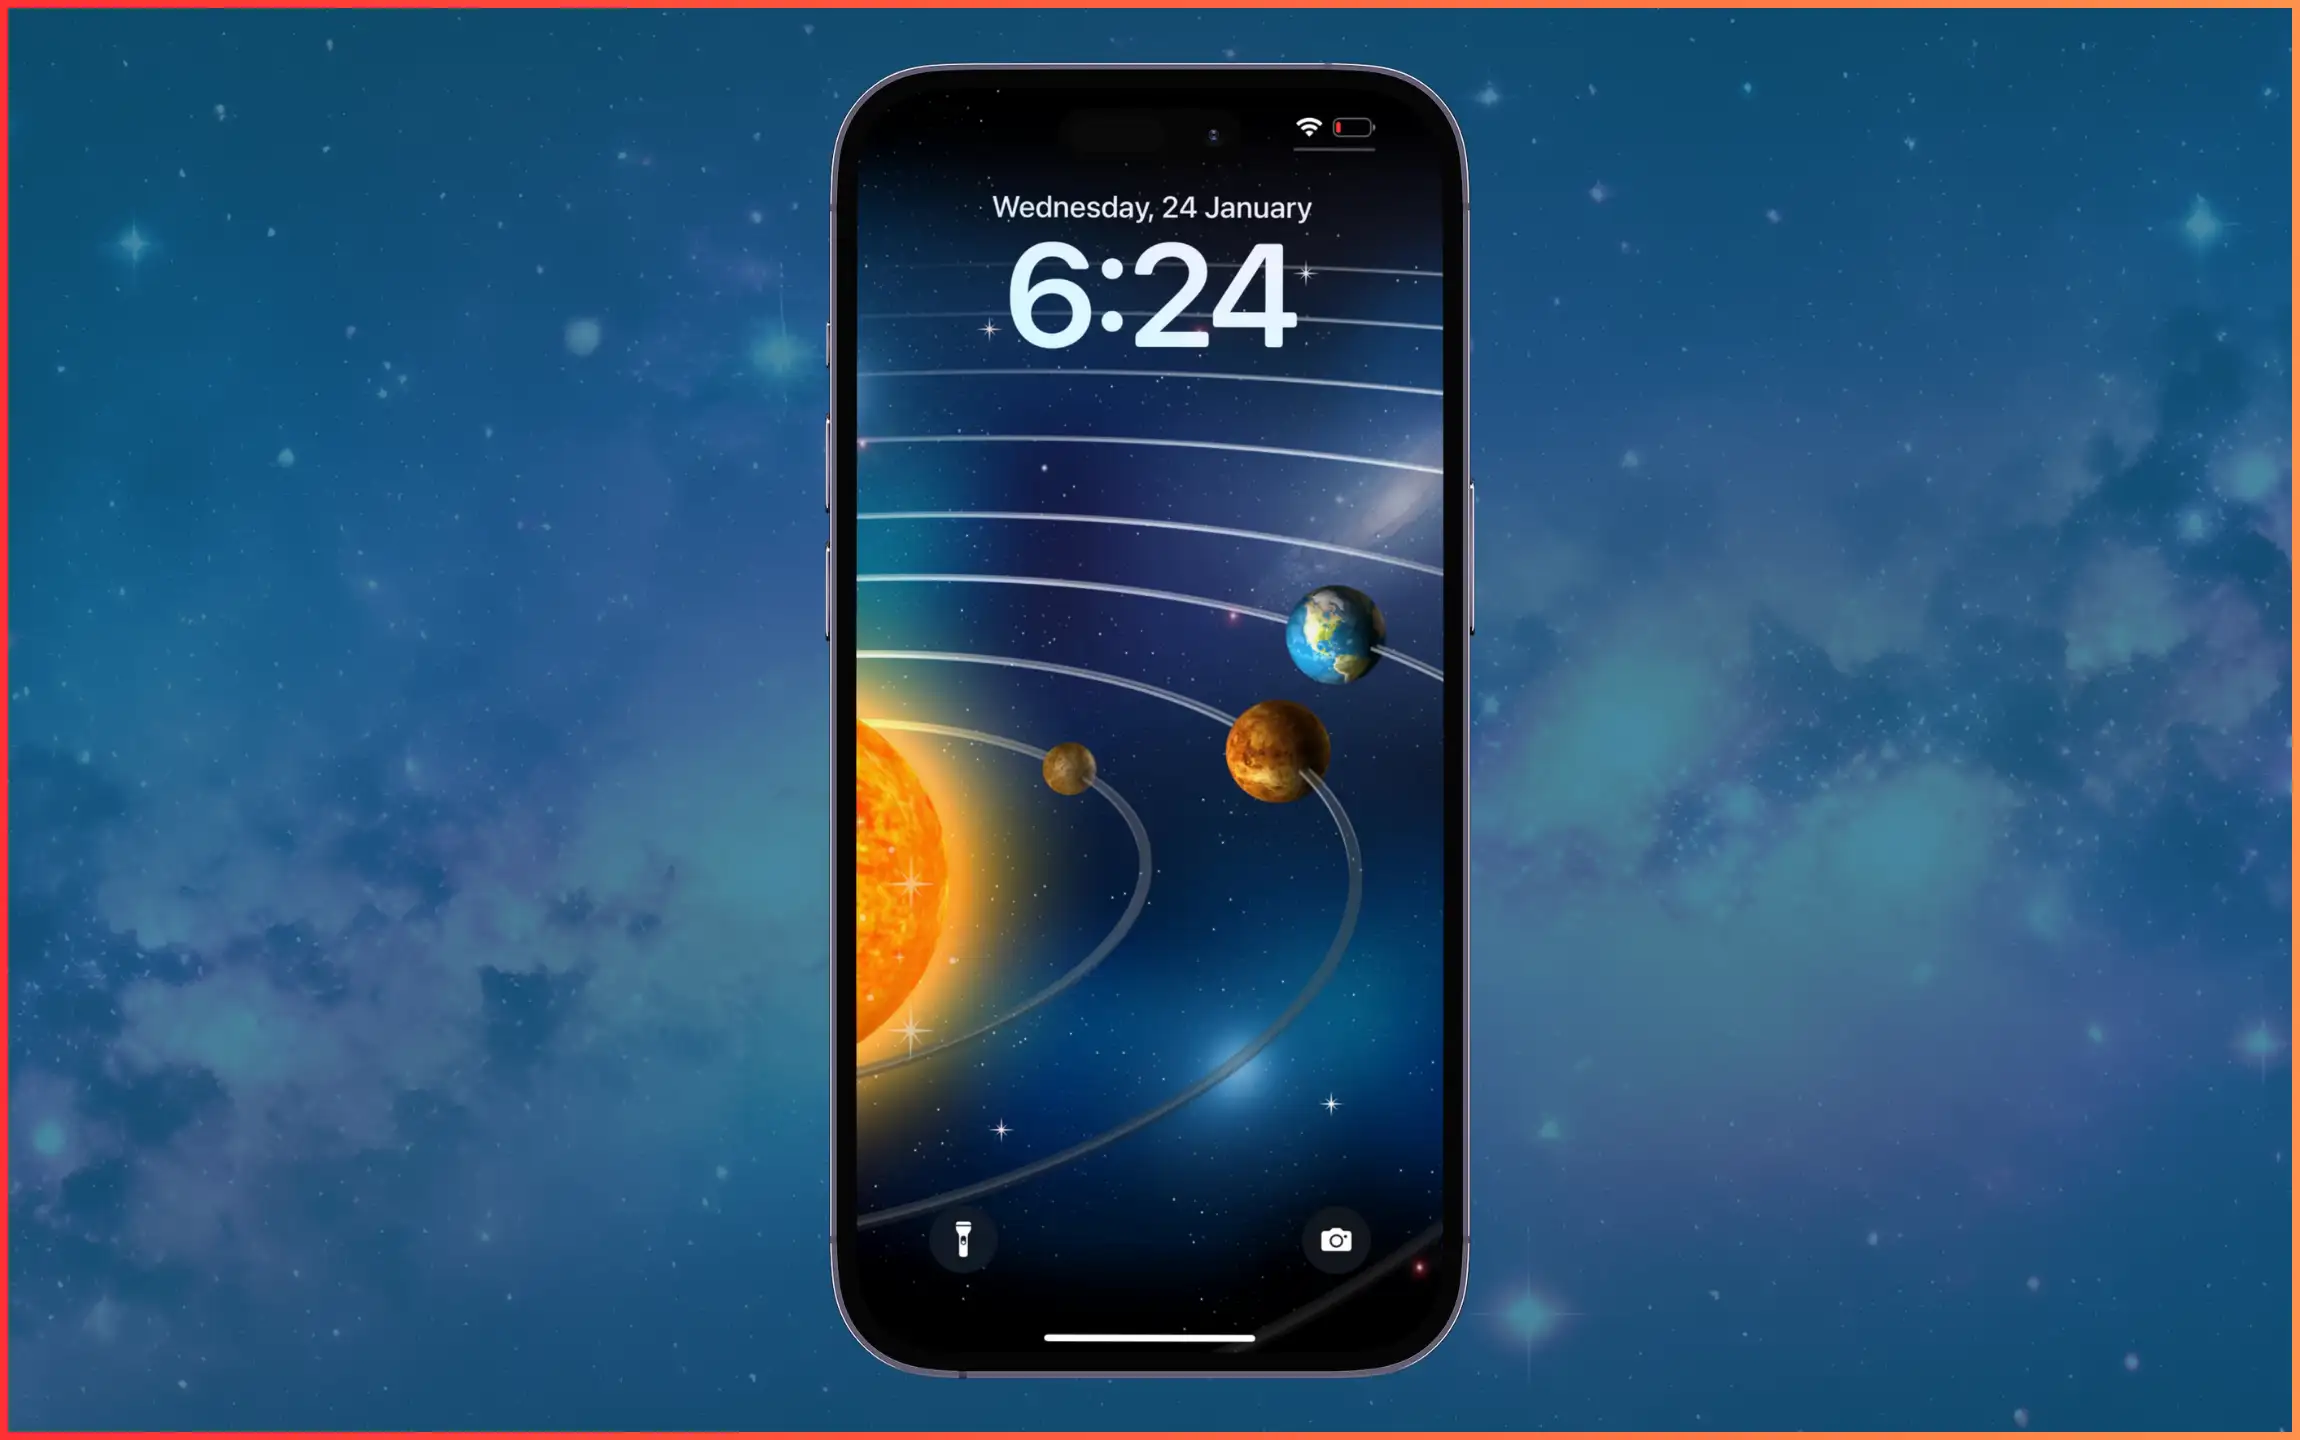 Solar System Space Wallpaper for iPhone